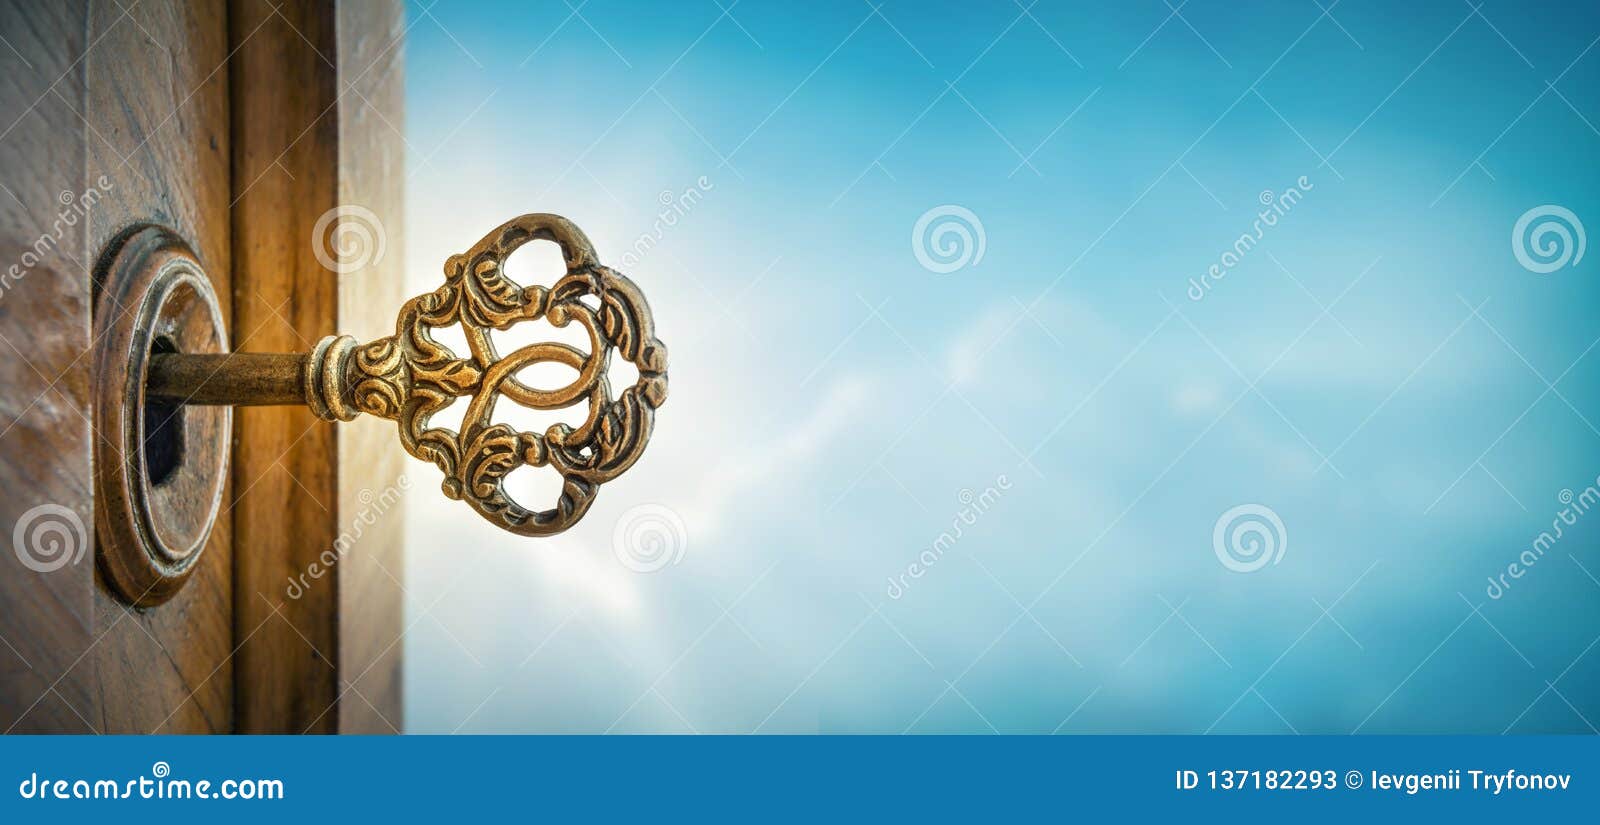 old key in keyhole on sky background with sun ray . concept,  and idea for history, business, security background